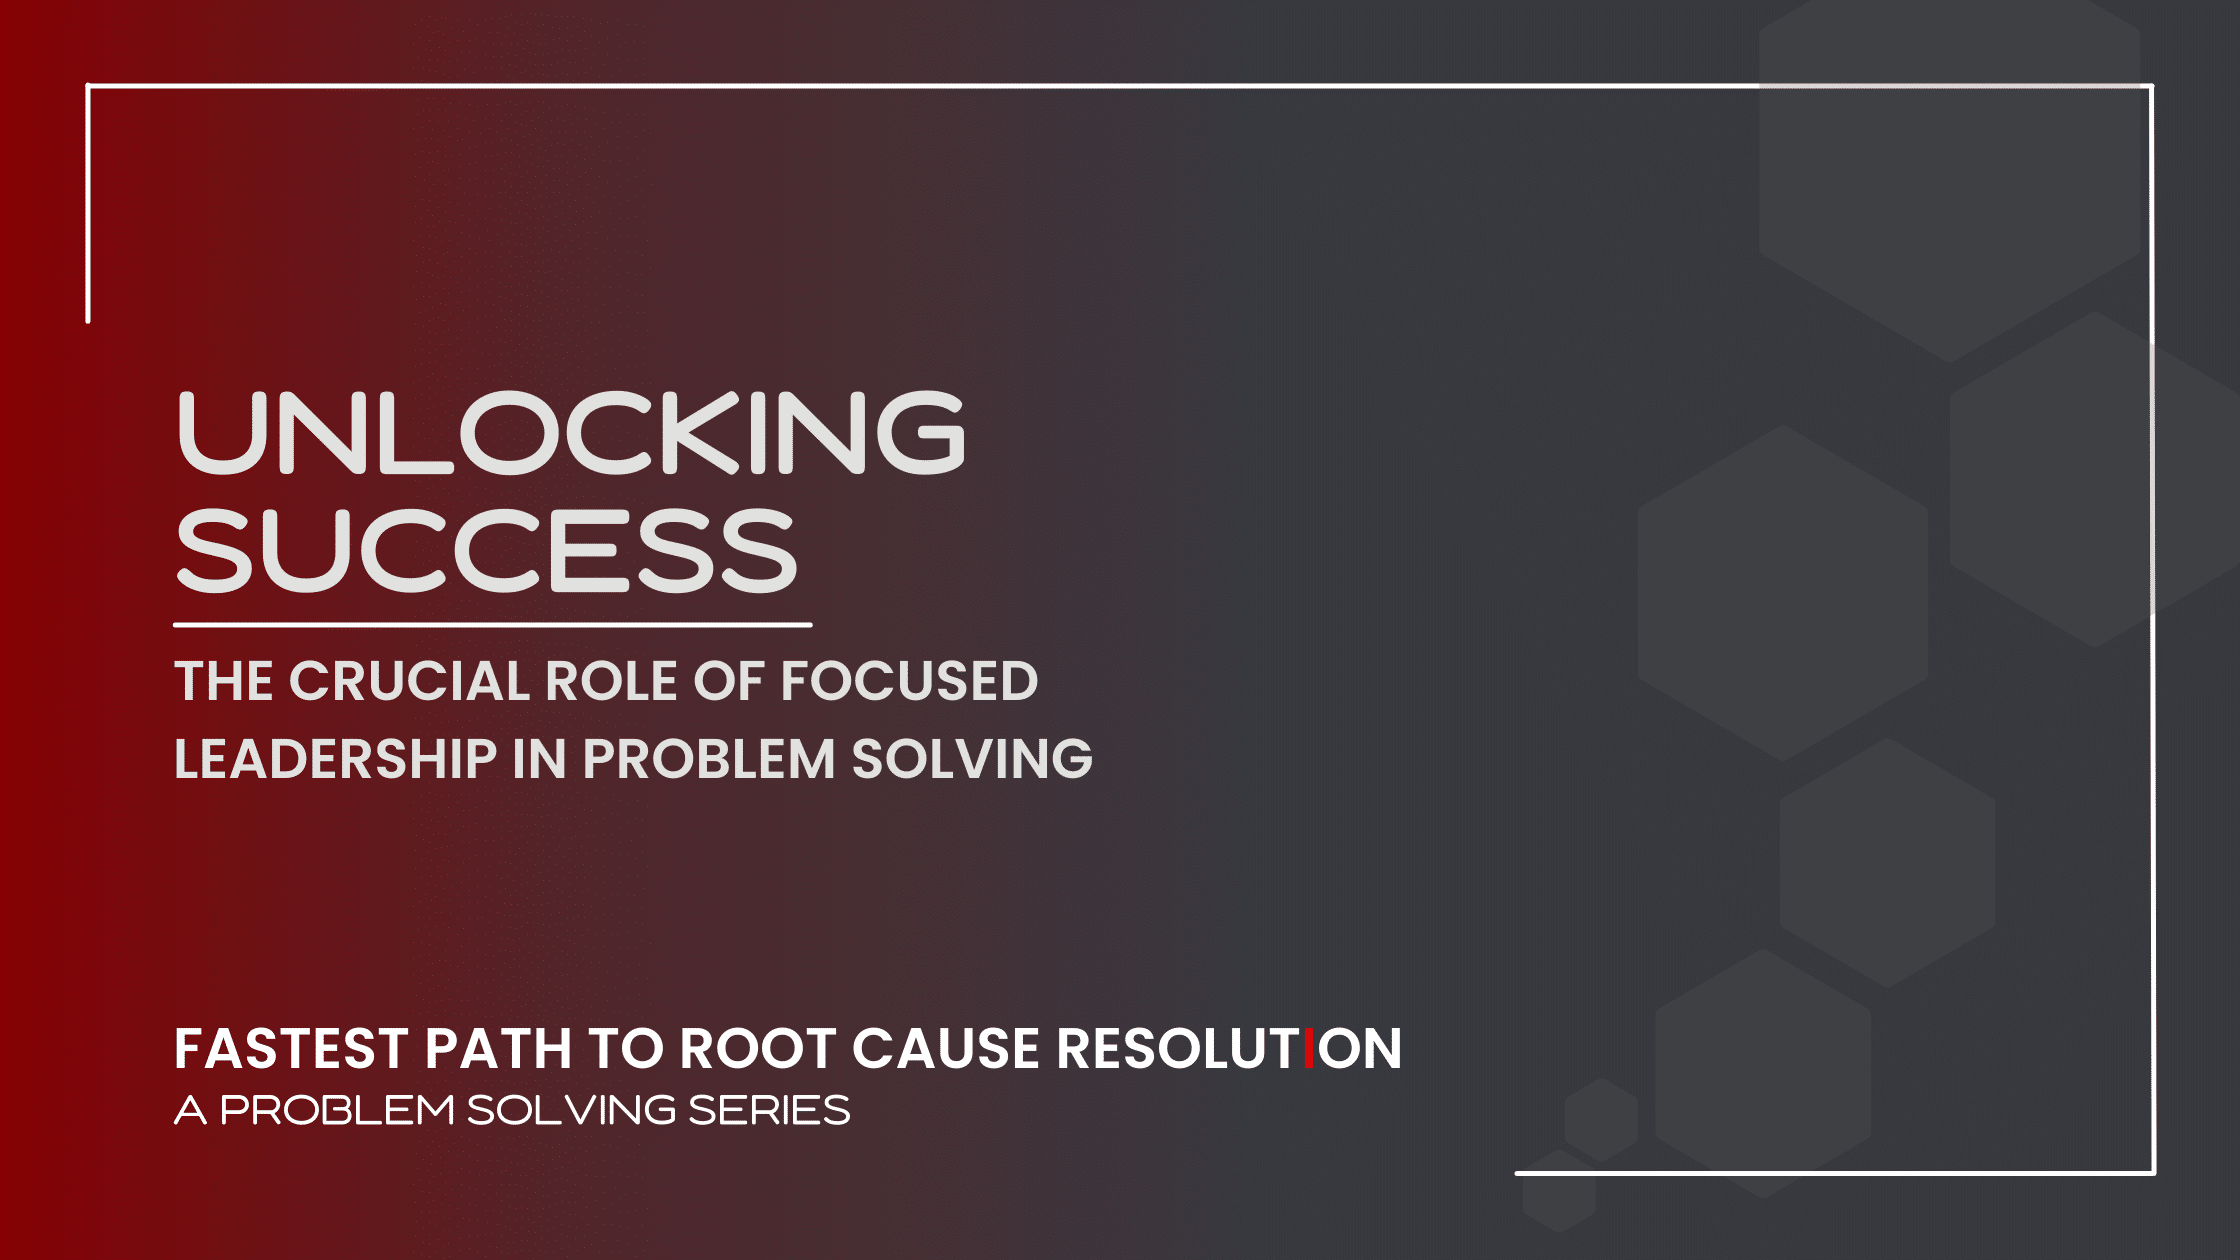 Title Slide for The Crucial role of focused leadership in problem solving